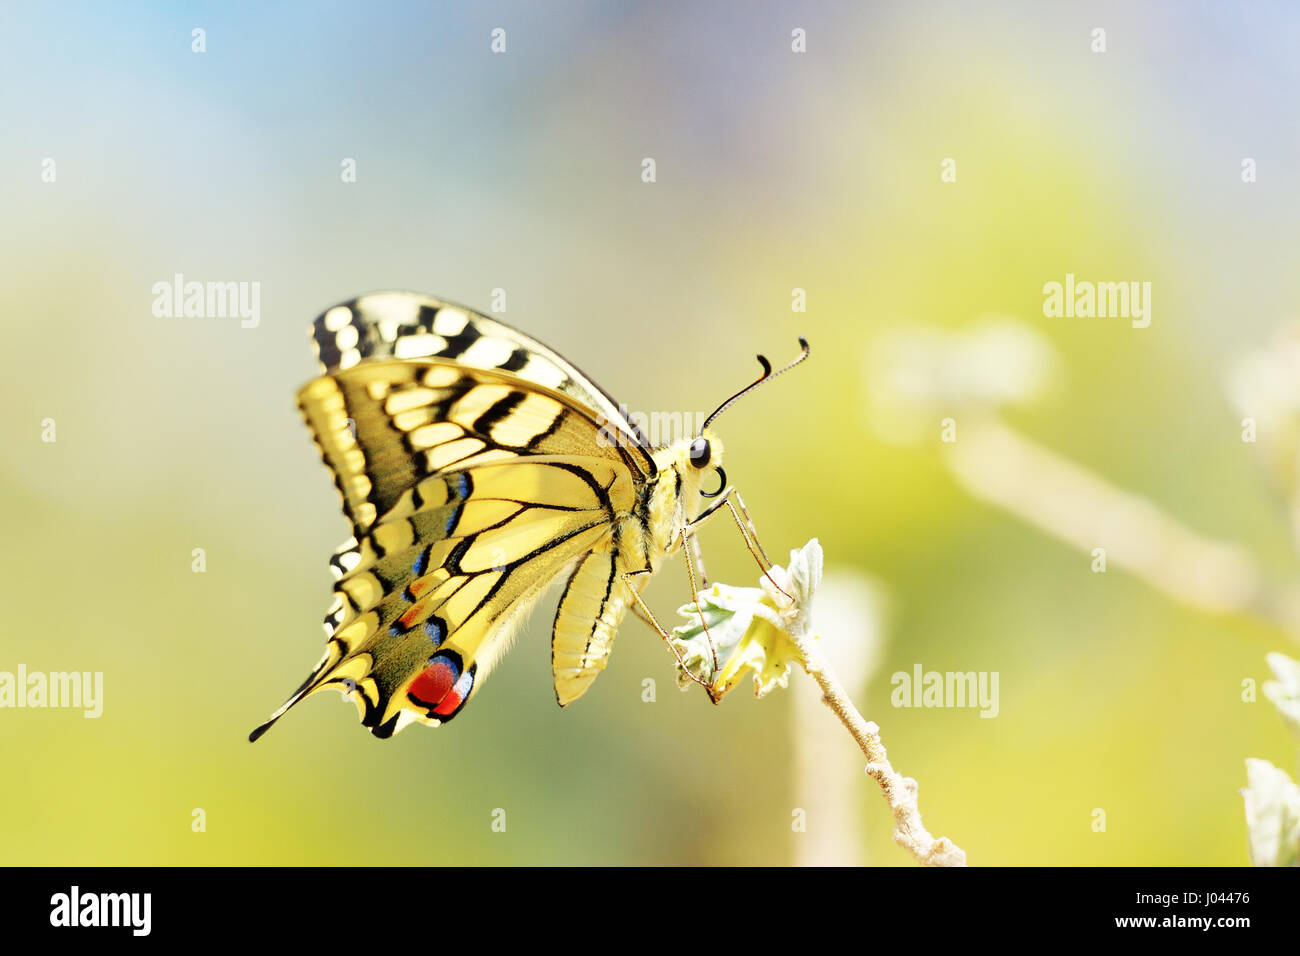 Colorful butterfly sitting on flower Banque D'Images